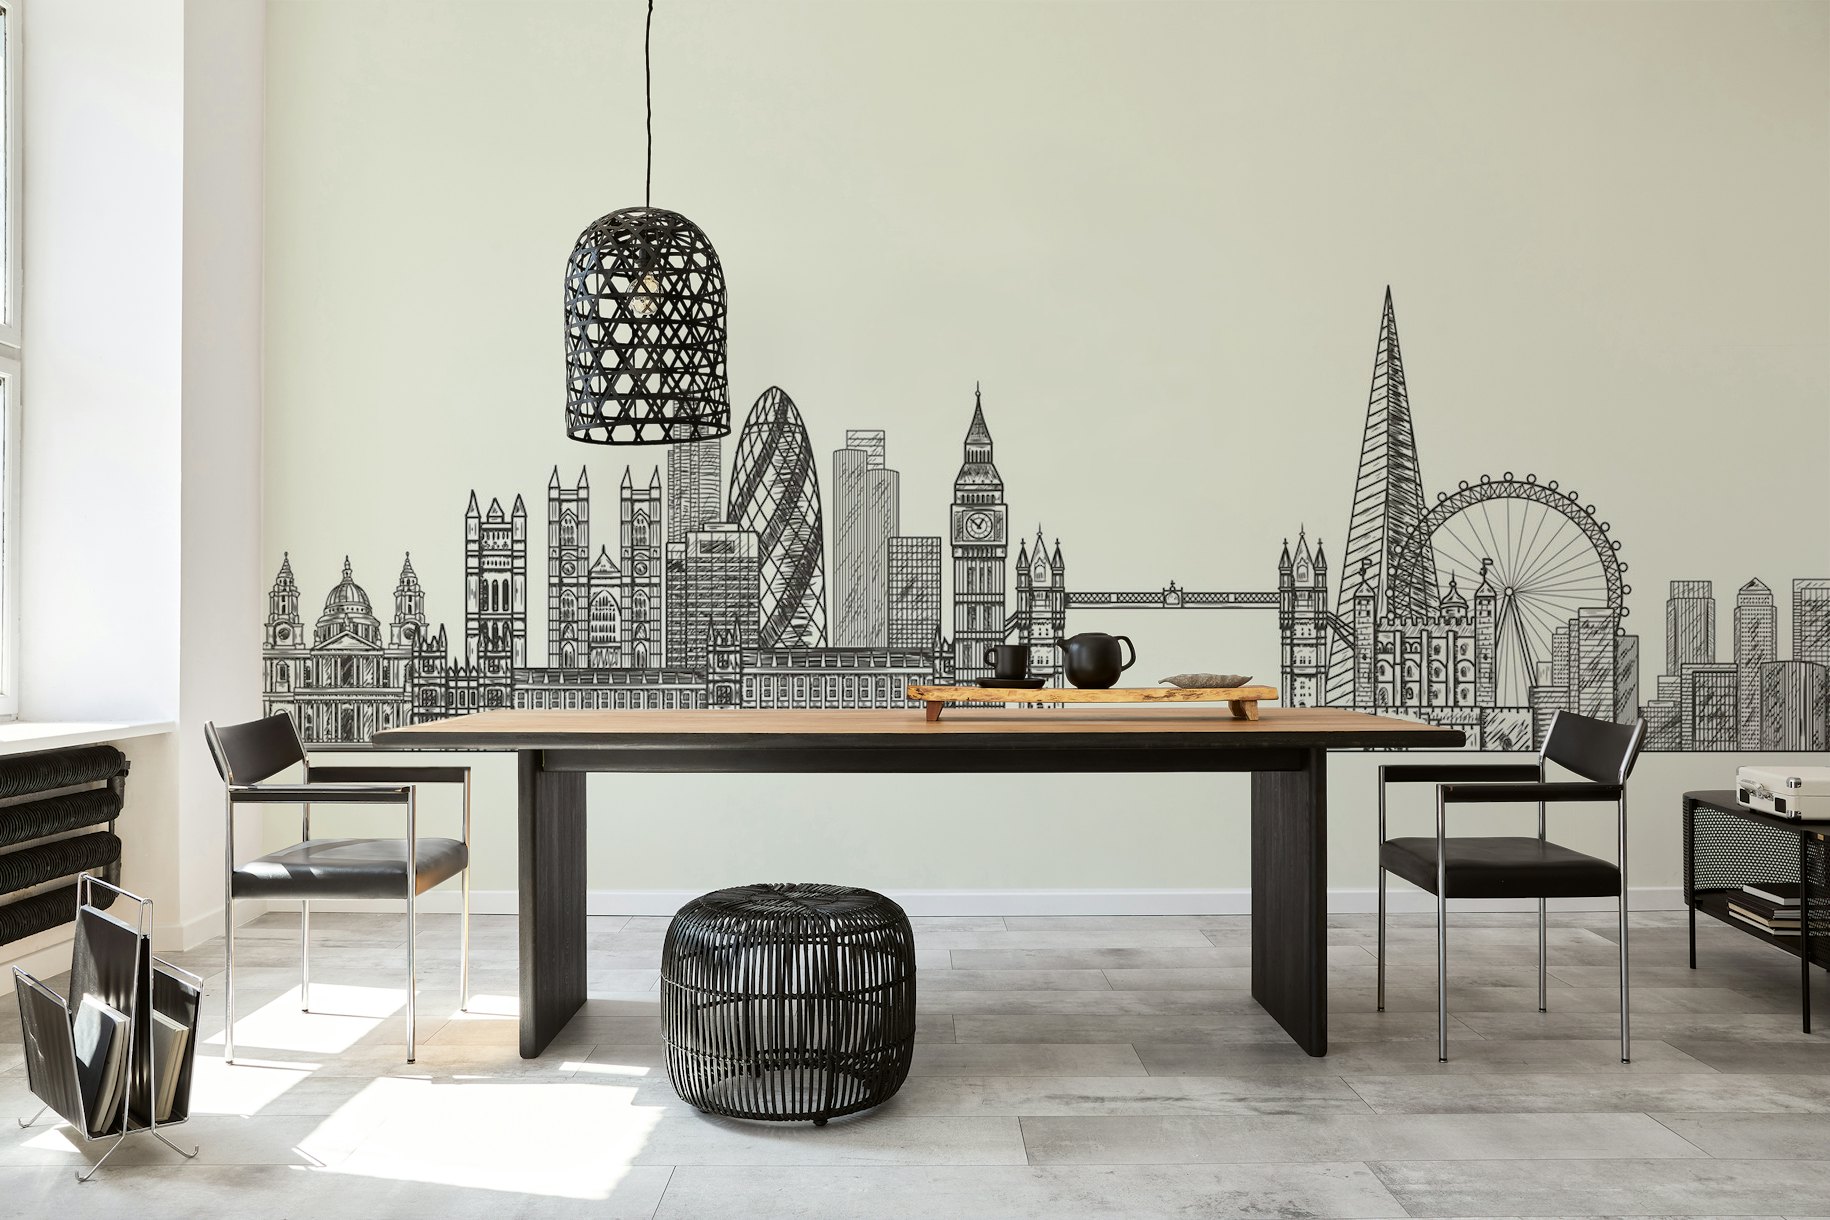 Black and White London skyline wallpaper featuring Big Ben and other iconic landmarks